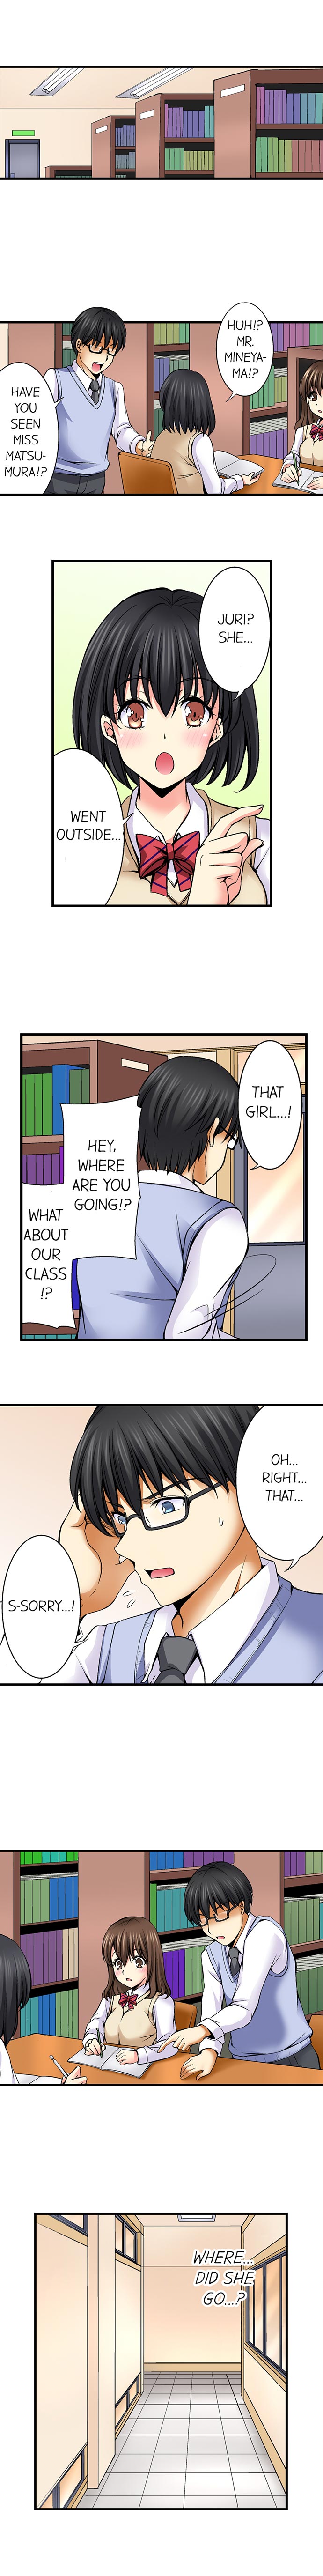 Why Can't i Have Sex With My Teacher? - Chapter 7 Page 3